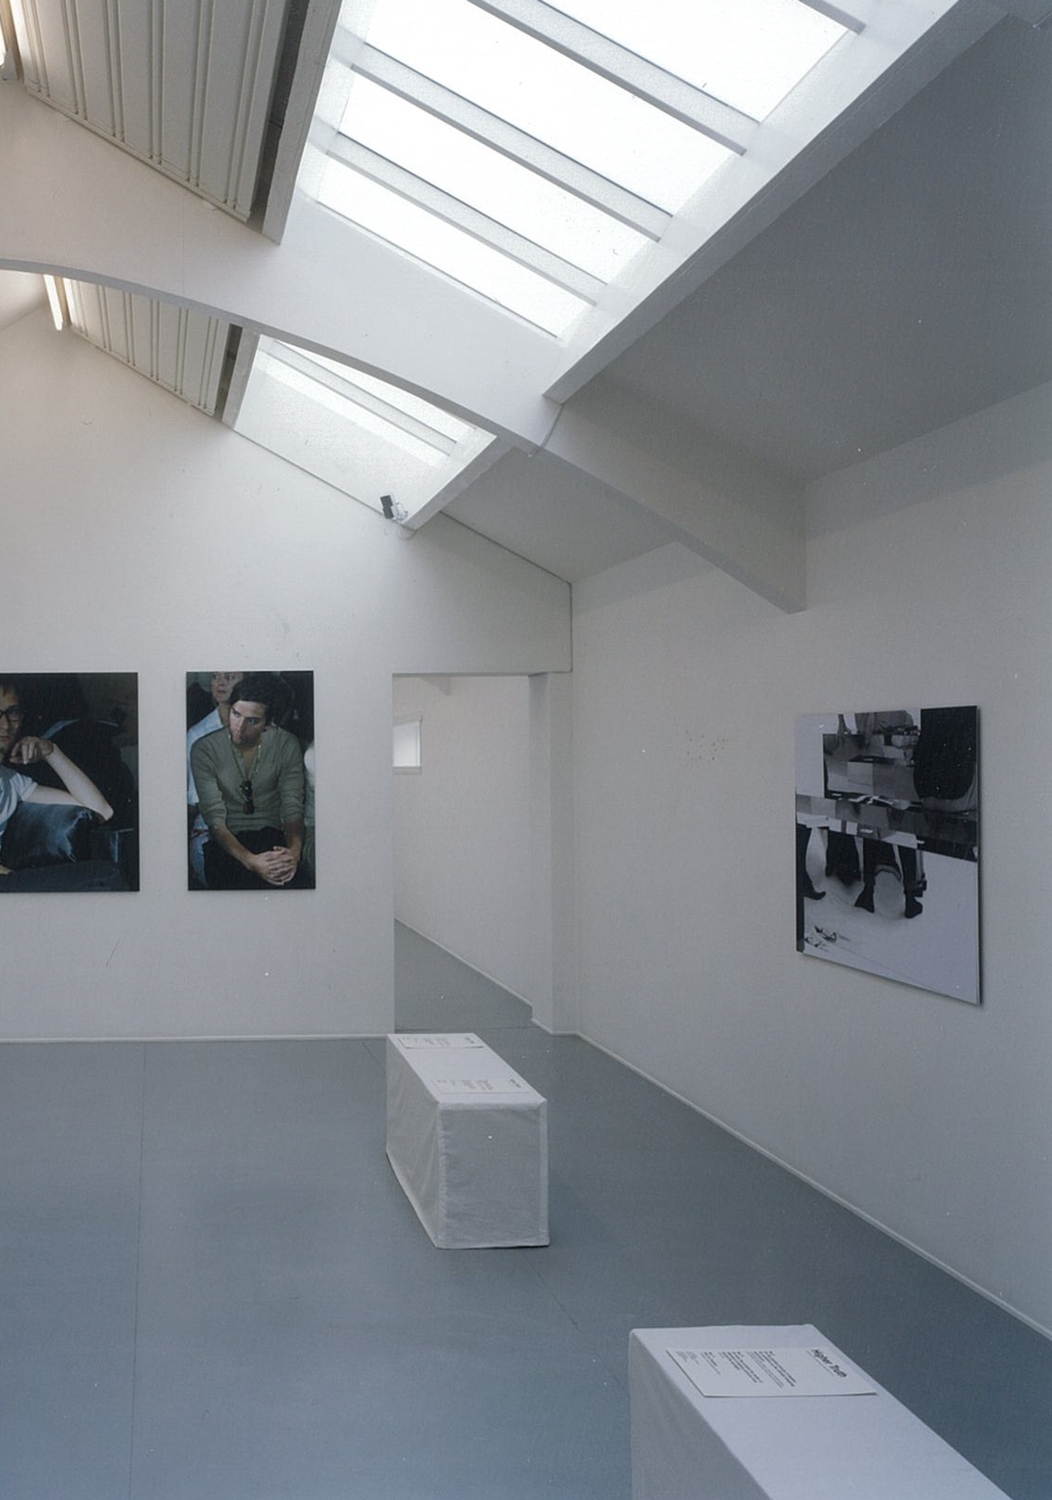 Roma Pas, 'Higher Truth no. 71', exhibition view, 2002 | Higher Truth no. 71 | Roma Pas